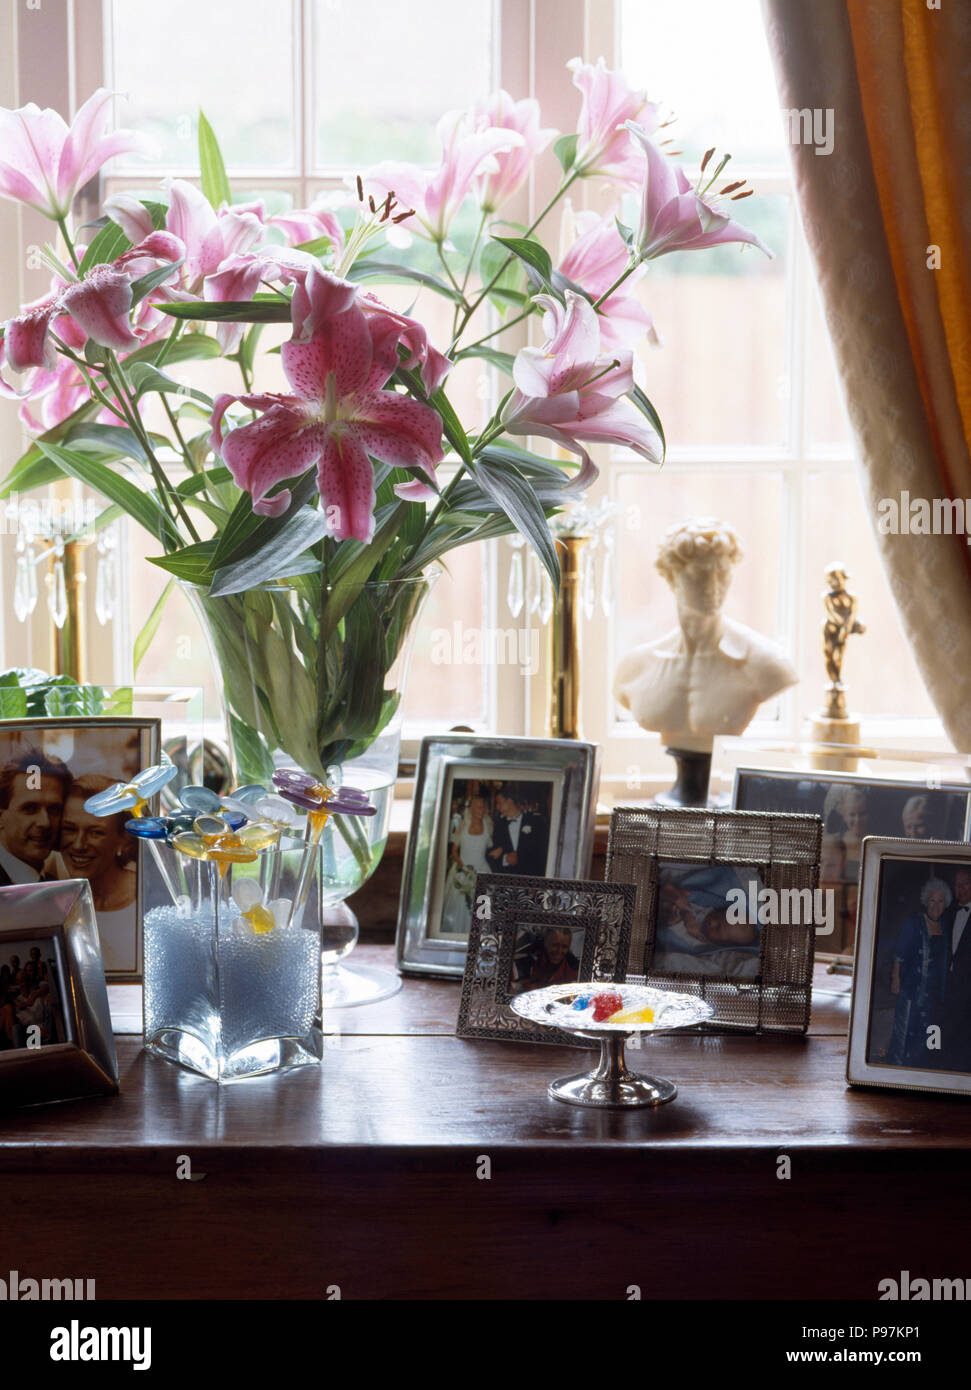 Vase of pink lilies and a collection of photographs on dressing table Stock Photo